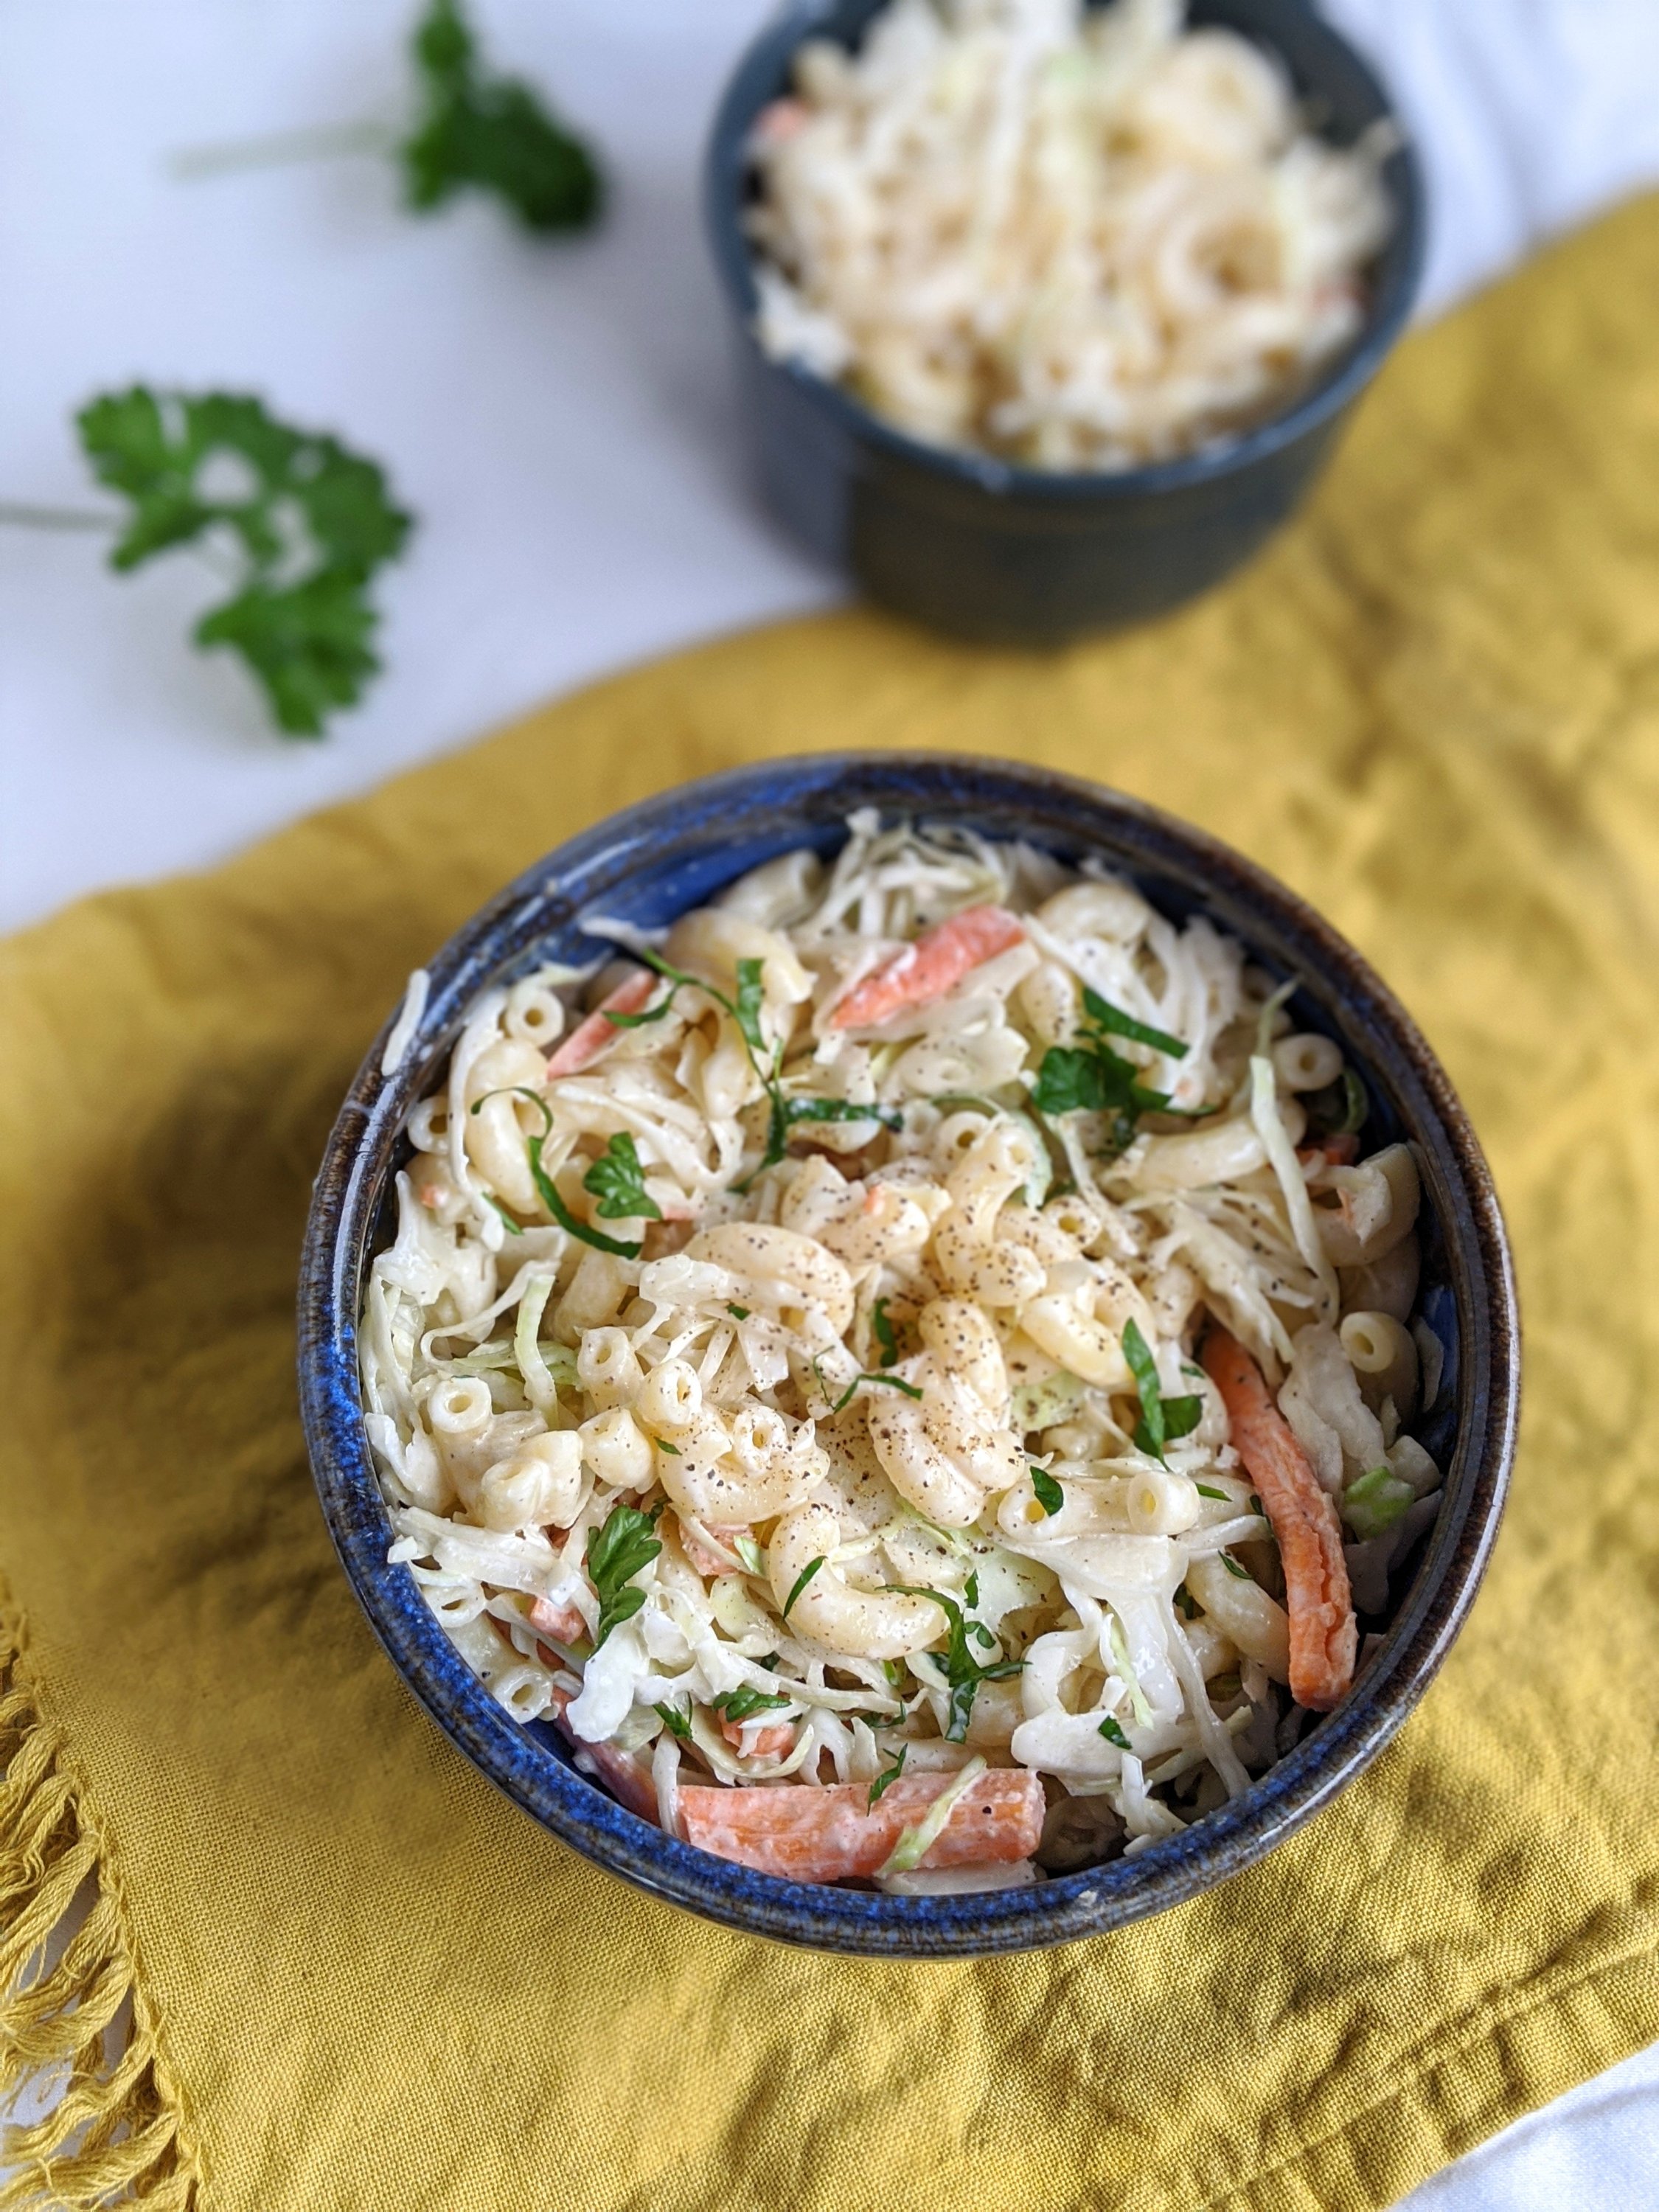 noodle coleslaw salad with carrots parsley and cabbage recipe macaroni coleslaw ideas